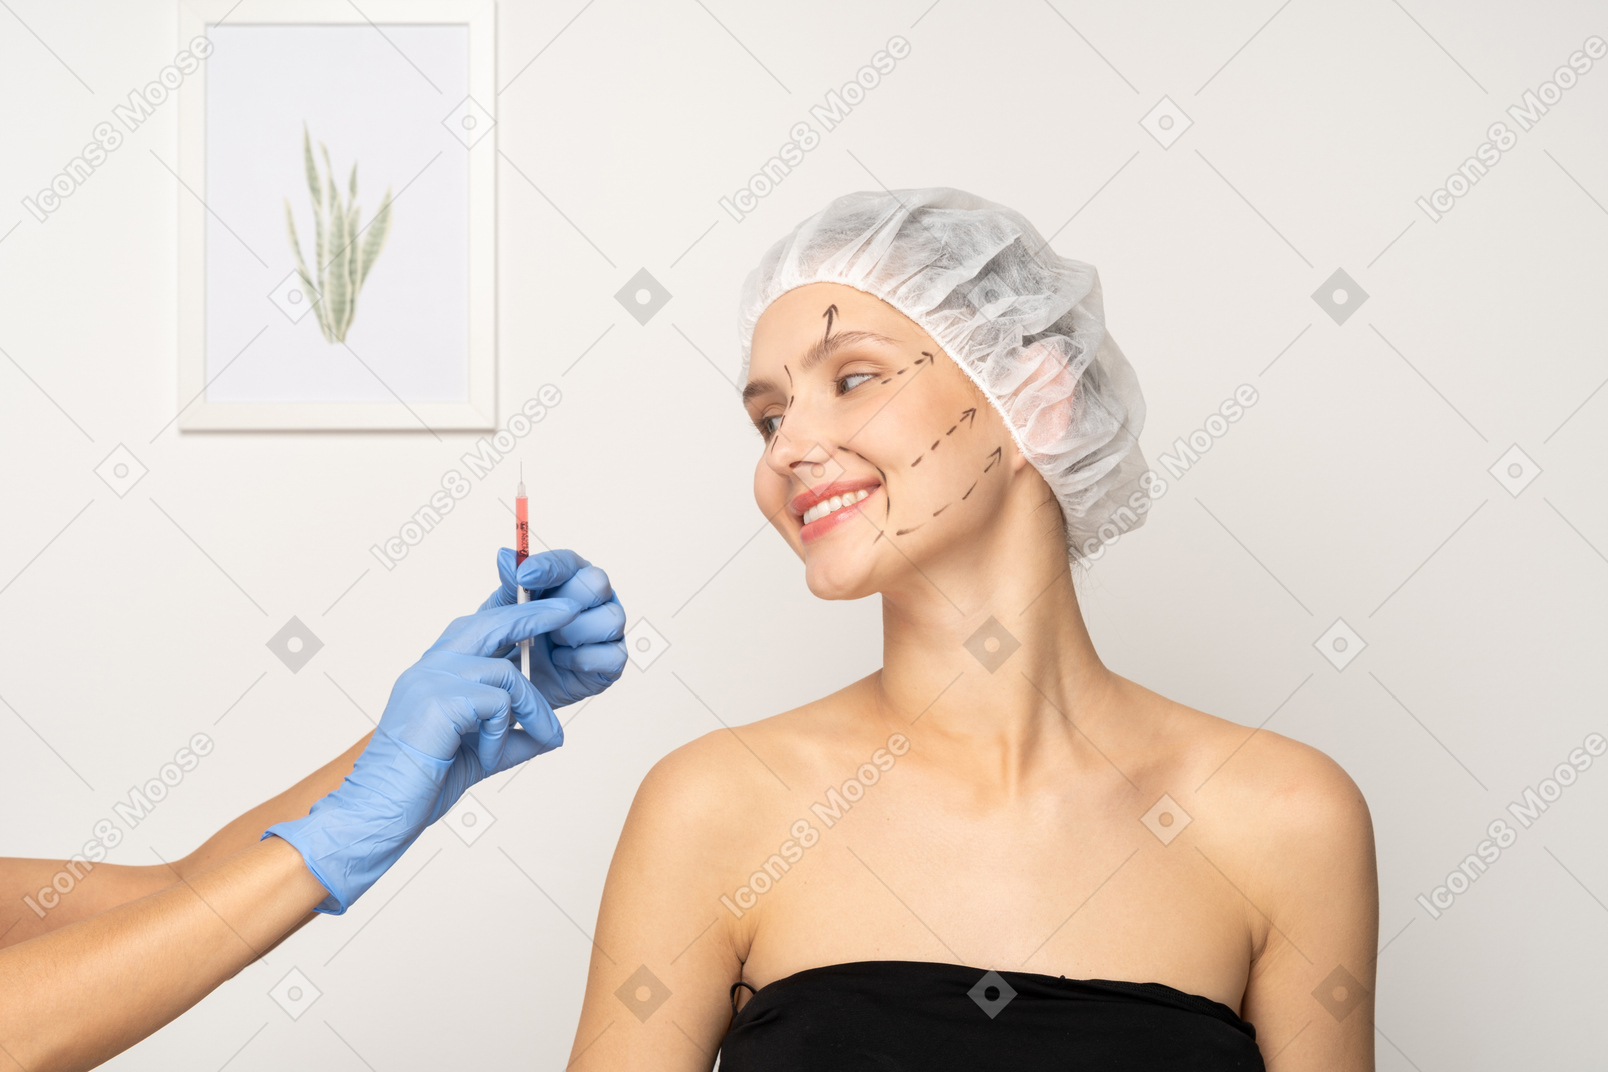 Young woman smiling and gloved hand holding up syringe